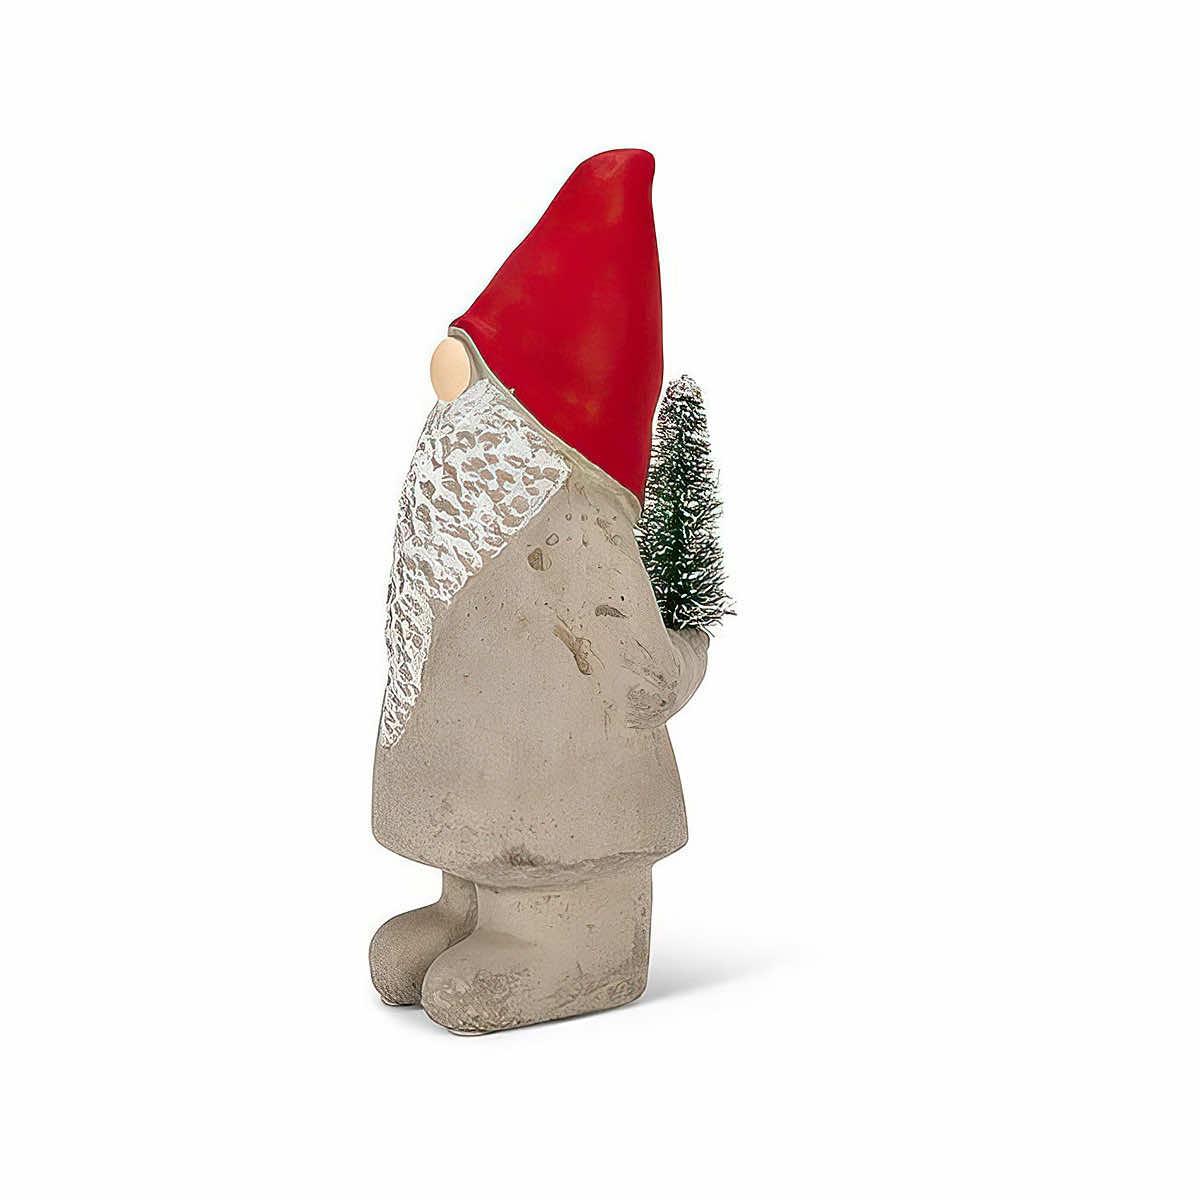  Small Gnome With Tree In Back Figure